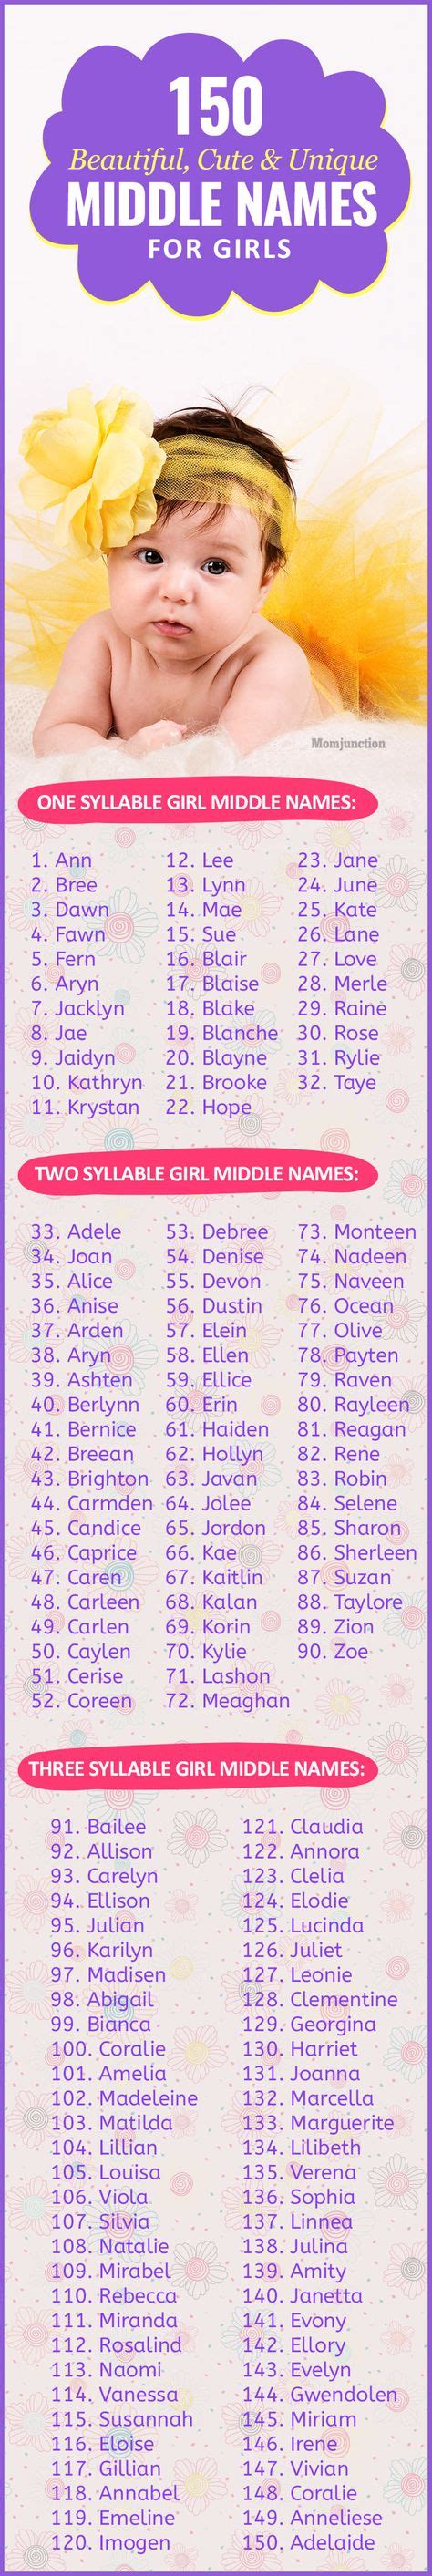 Beautiful Cute And Unique Middle Names For Girls Middle Names